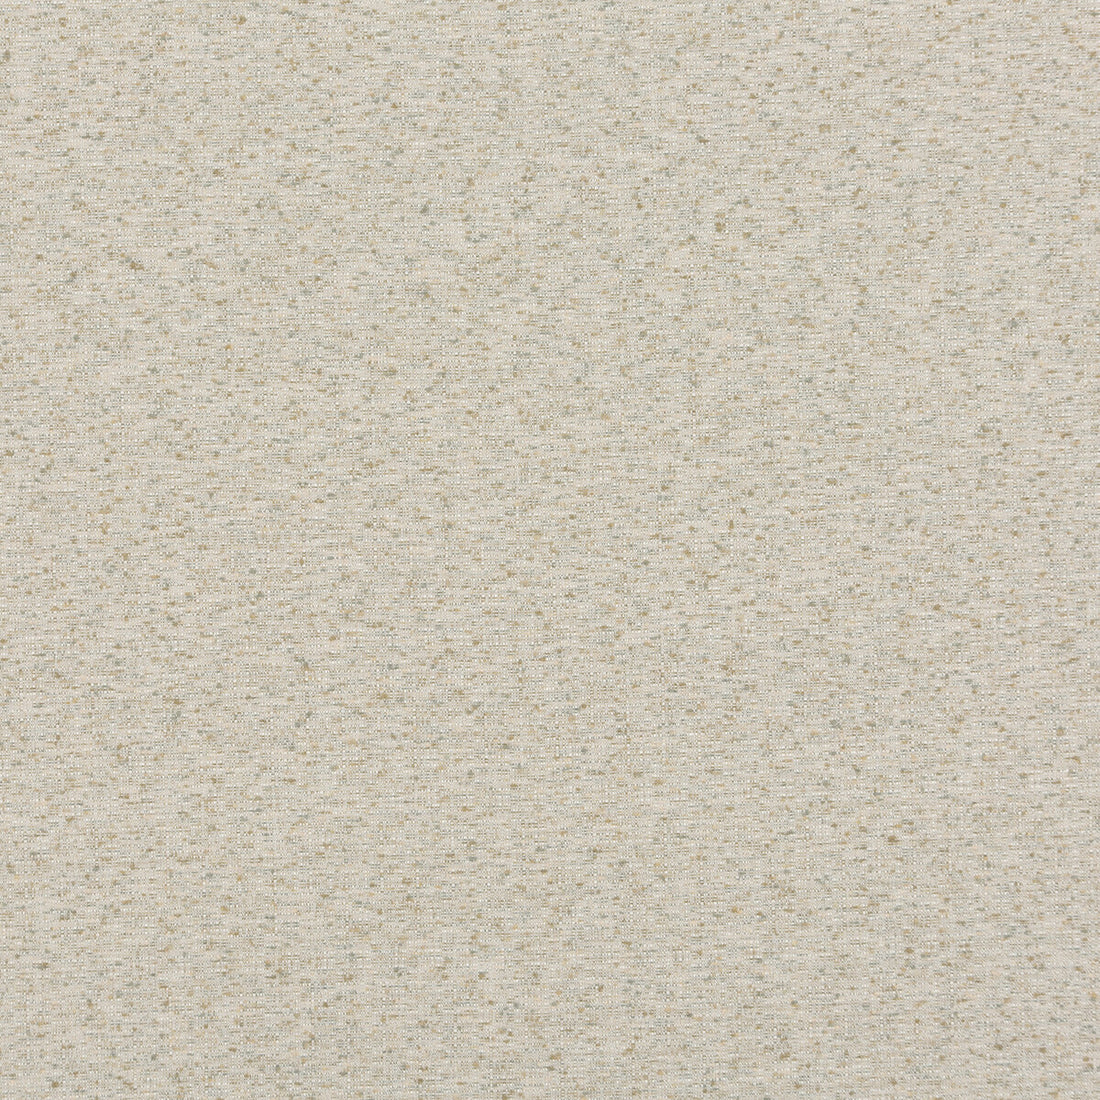 Drift fabric in marble color - pattern BF10678.106.0 - by G P &amp; J Baker in the Essential Colours collection